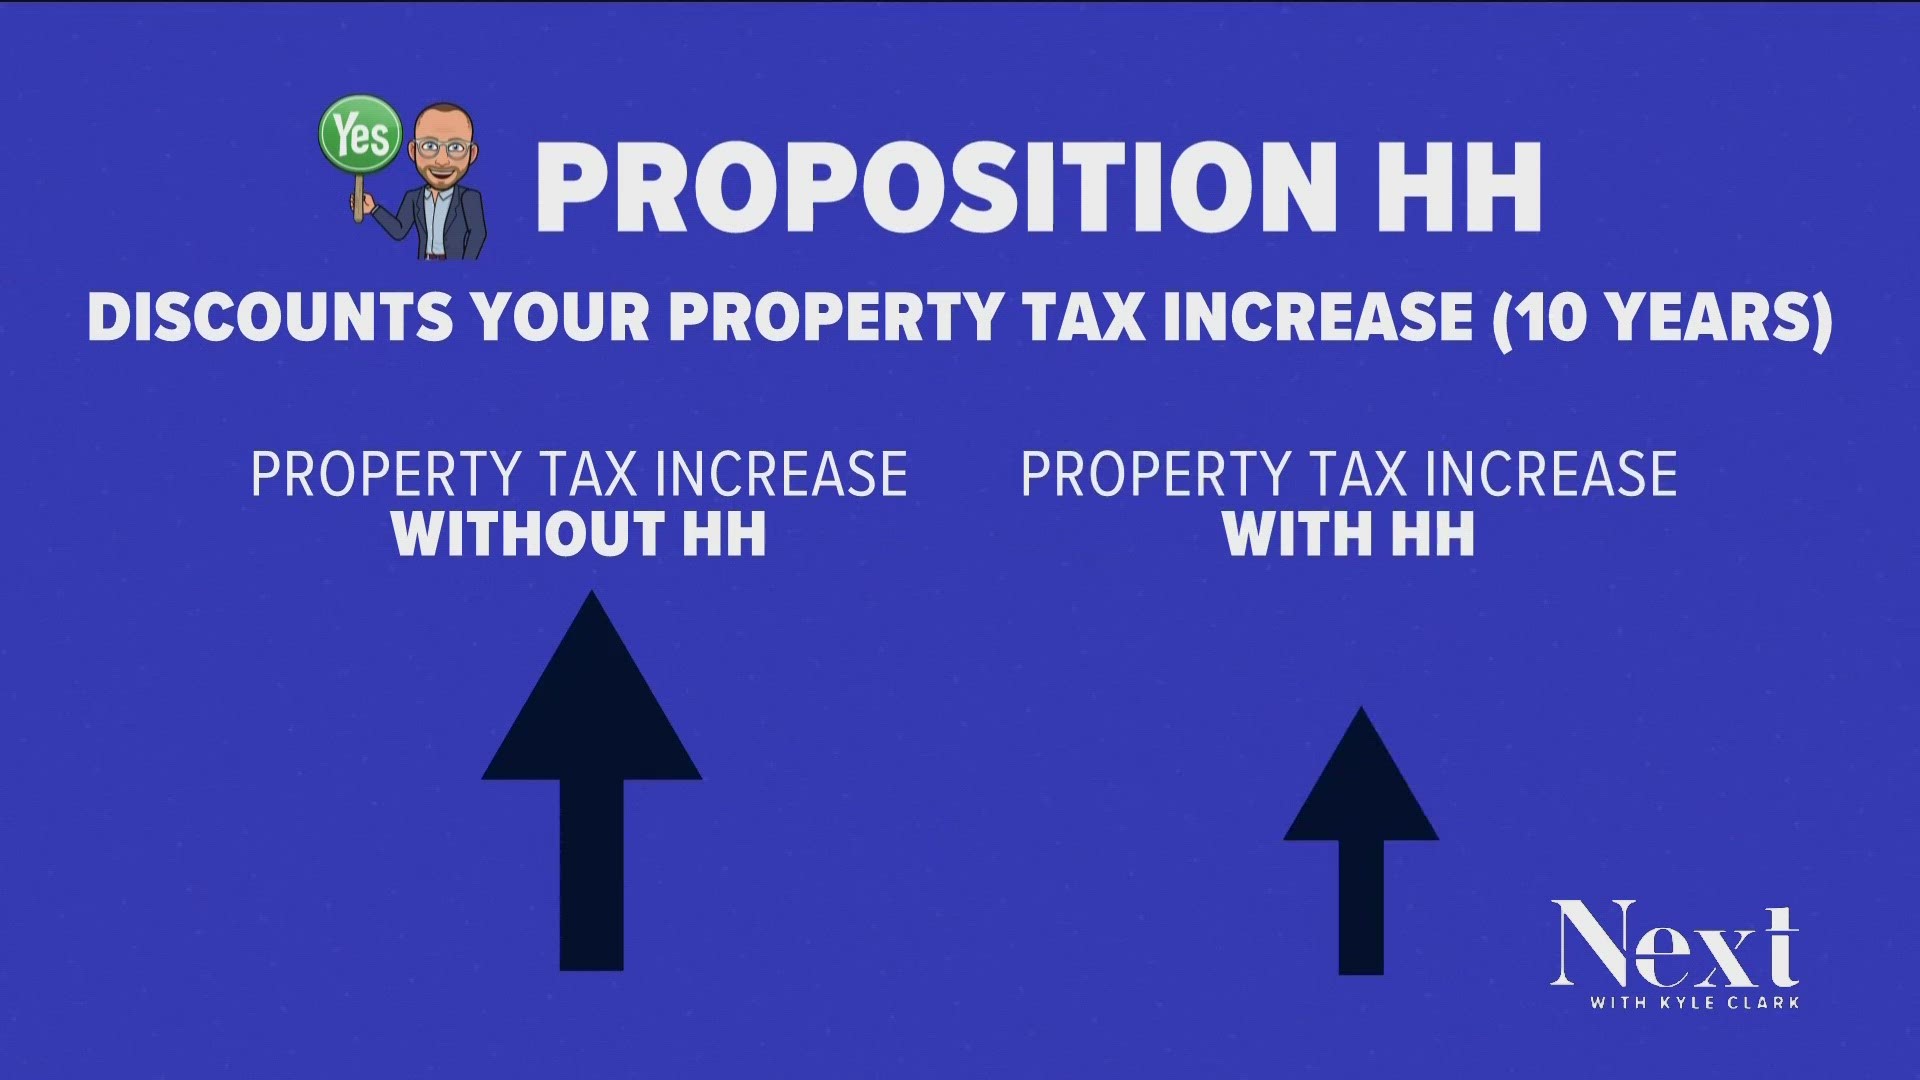 A "yes" on Proposition HH means a lot of things, but let's be clear on what it doesn't do for you and your property taxes.